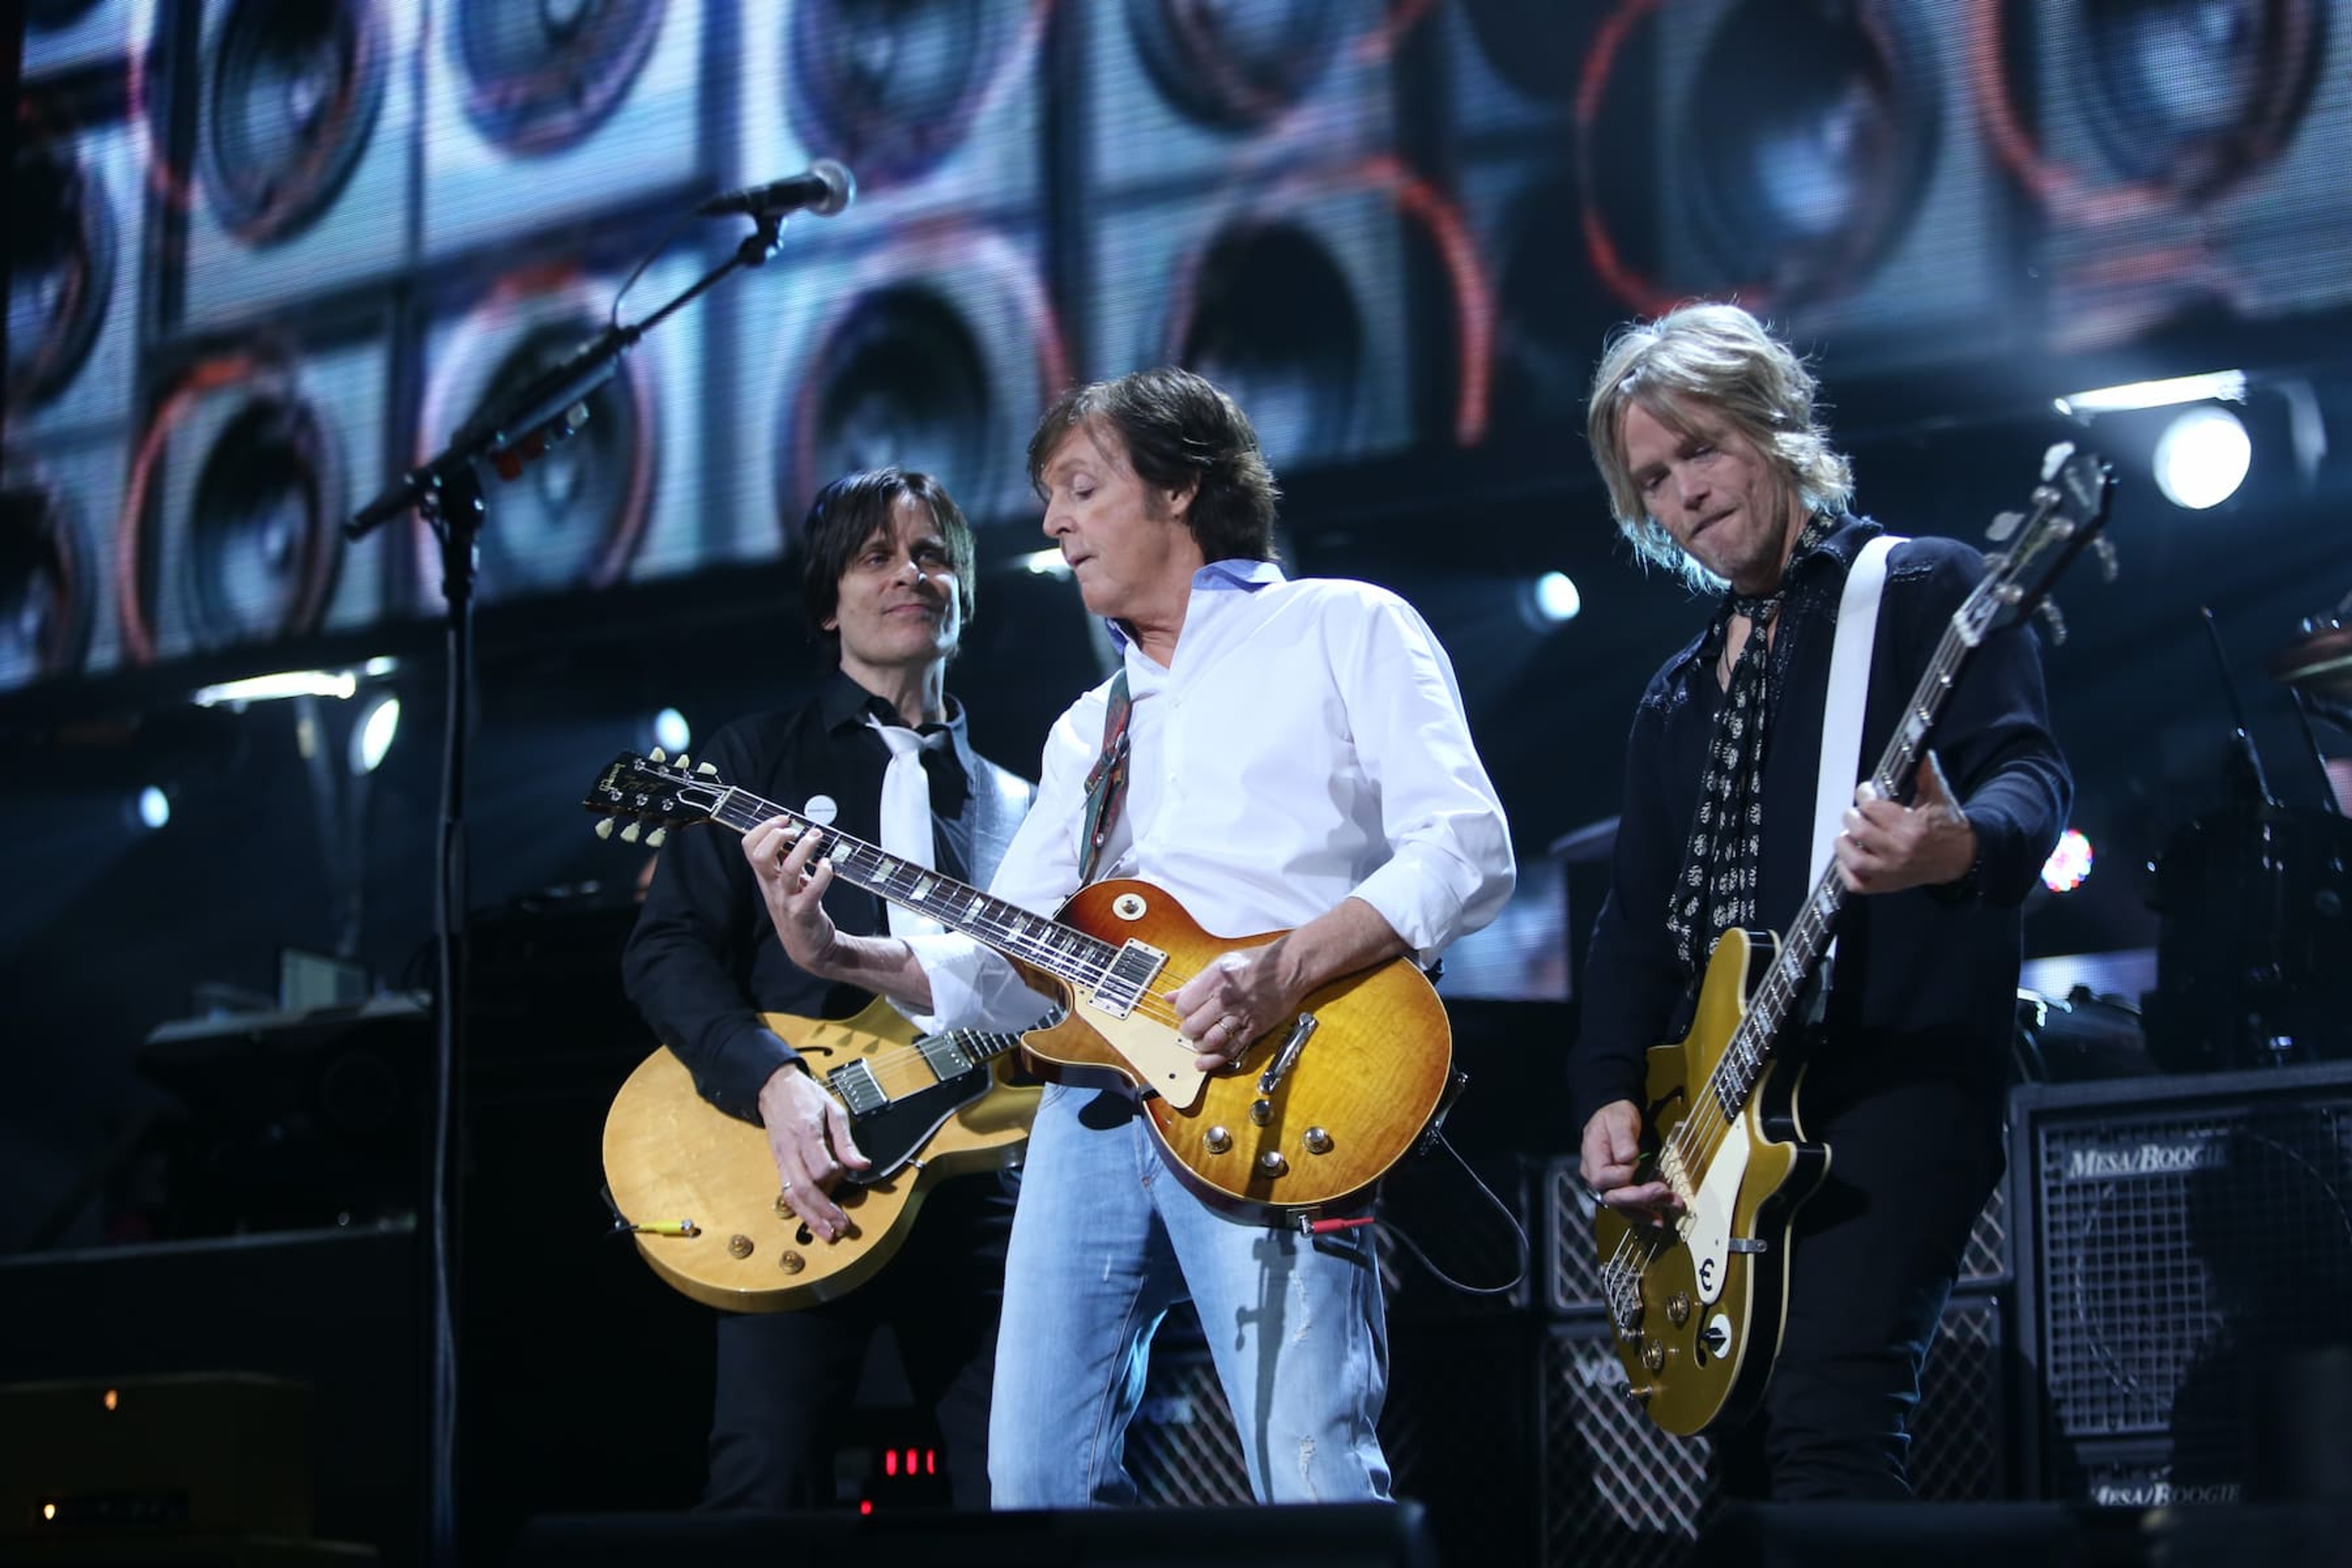 Photo of Paul playing bass on stage with Rusty Anderson and Brain Ray during the 12-12-12 benefit concert.